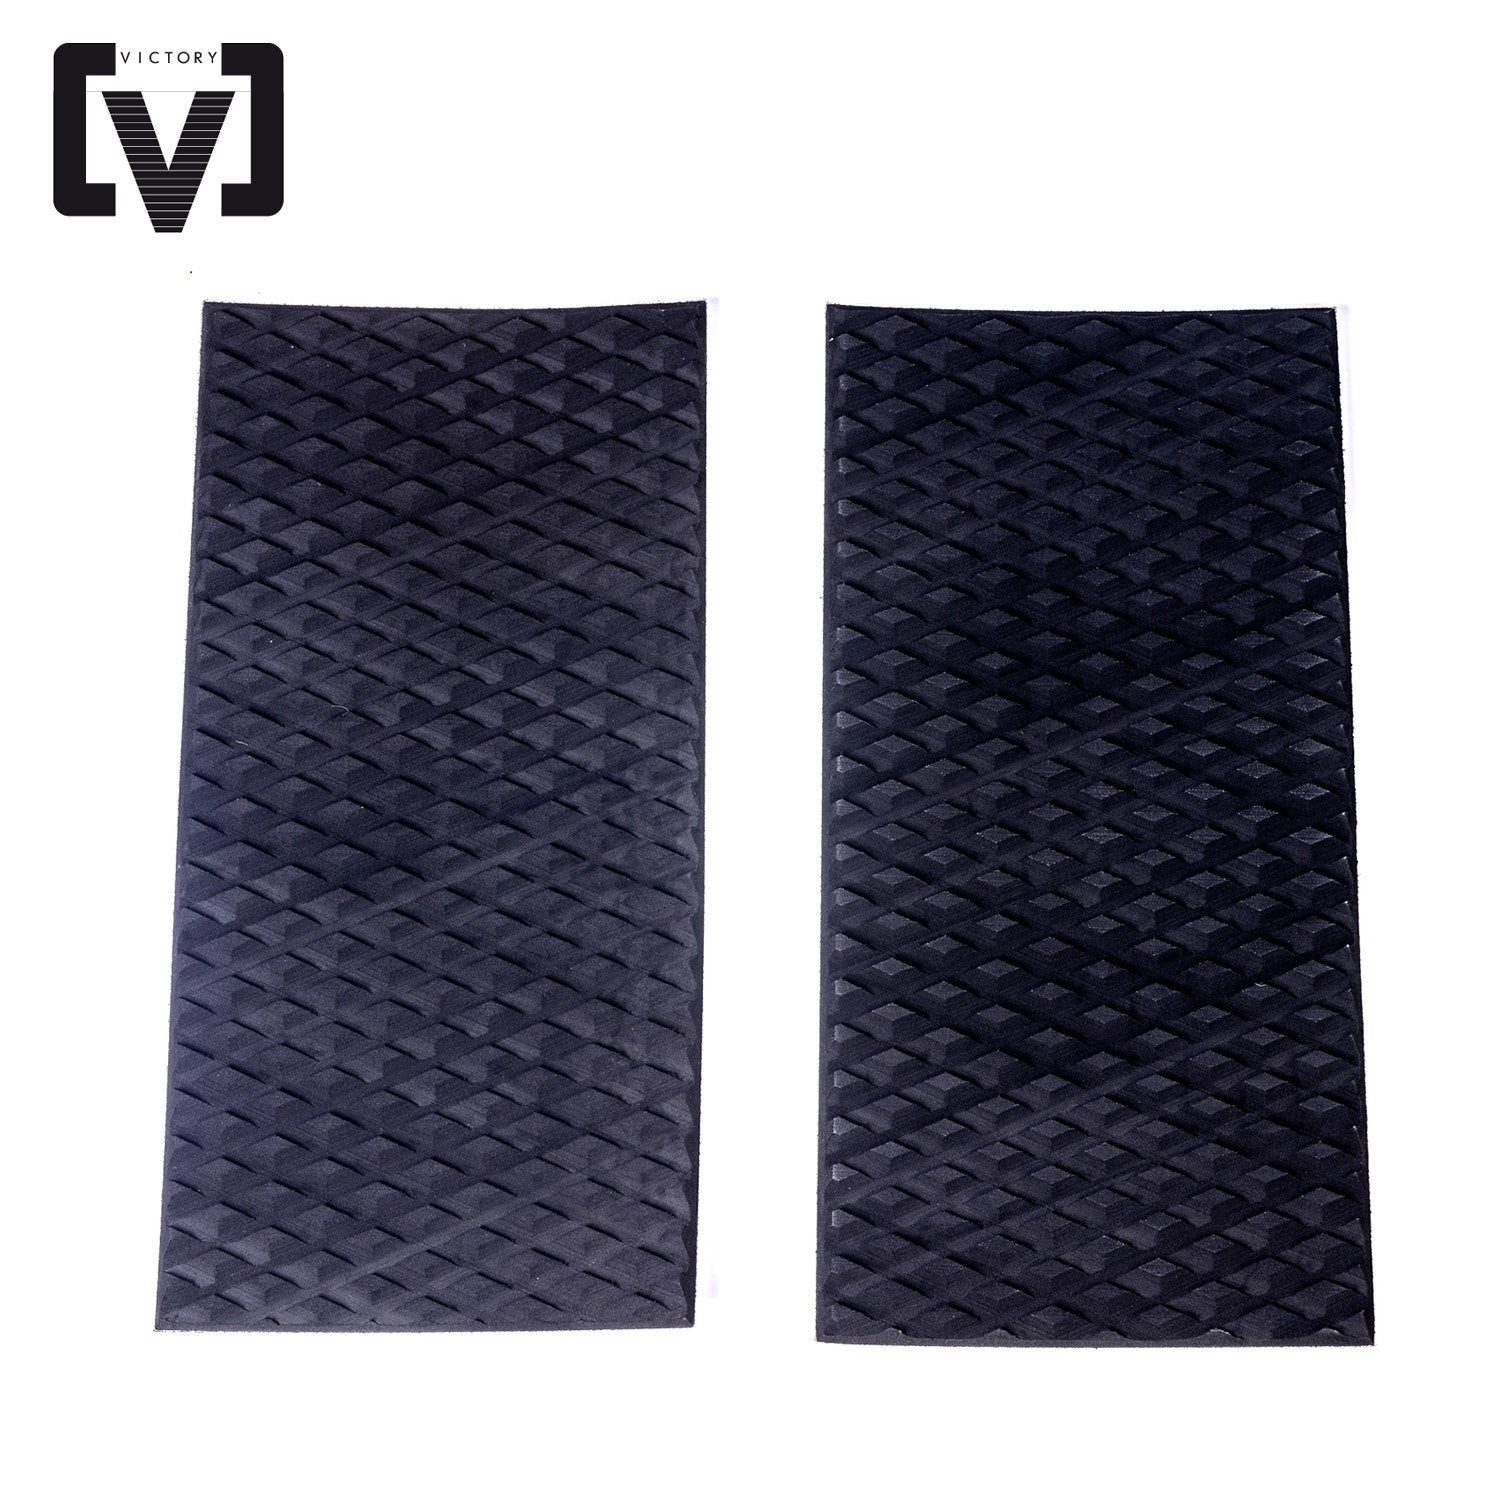 VICTORY - Surf Pads 2x Sheets - Black